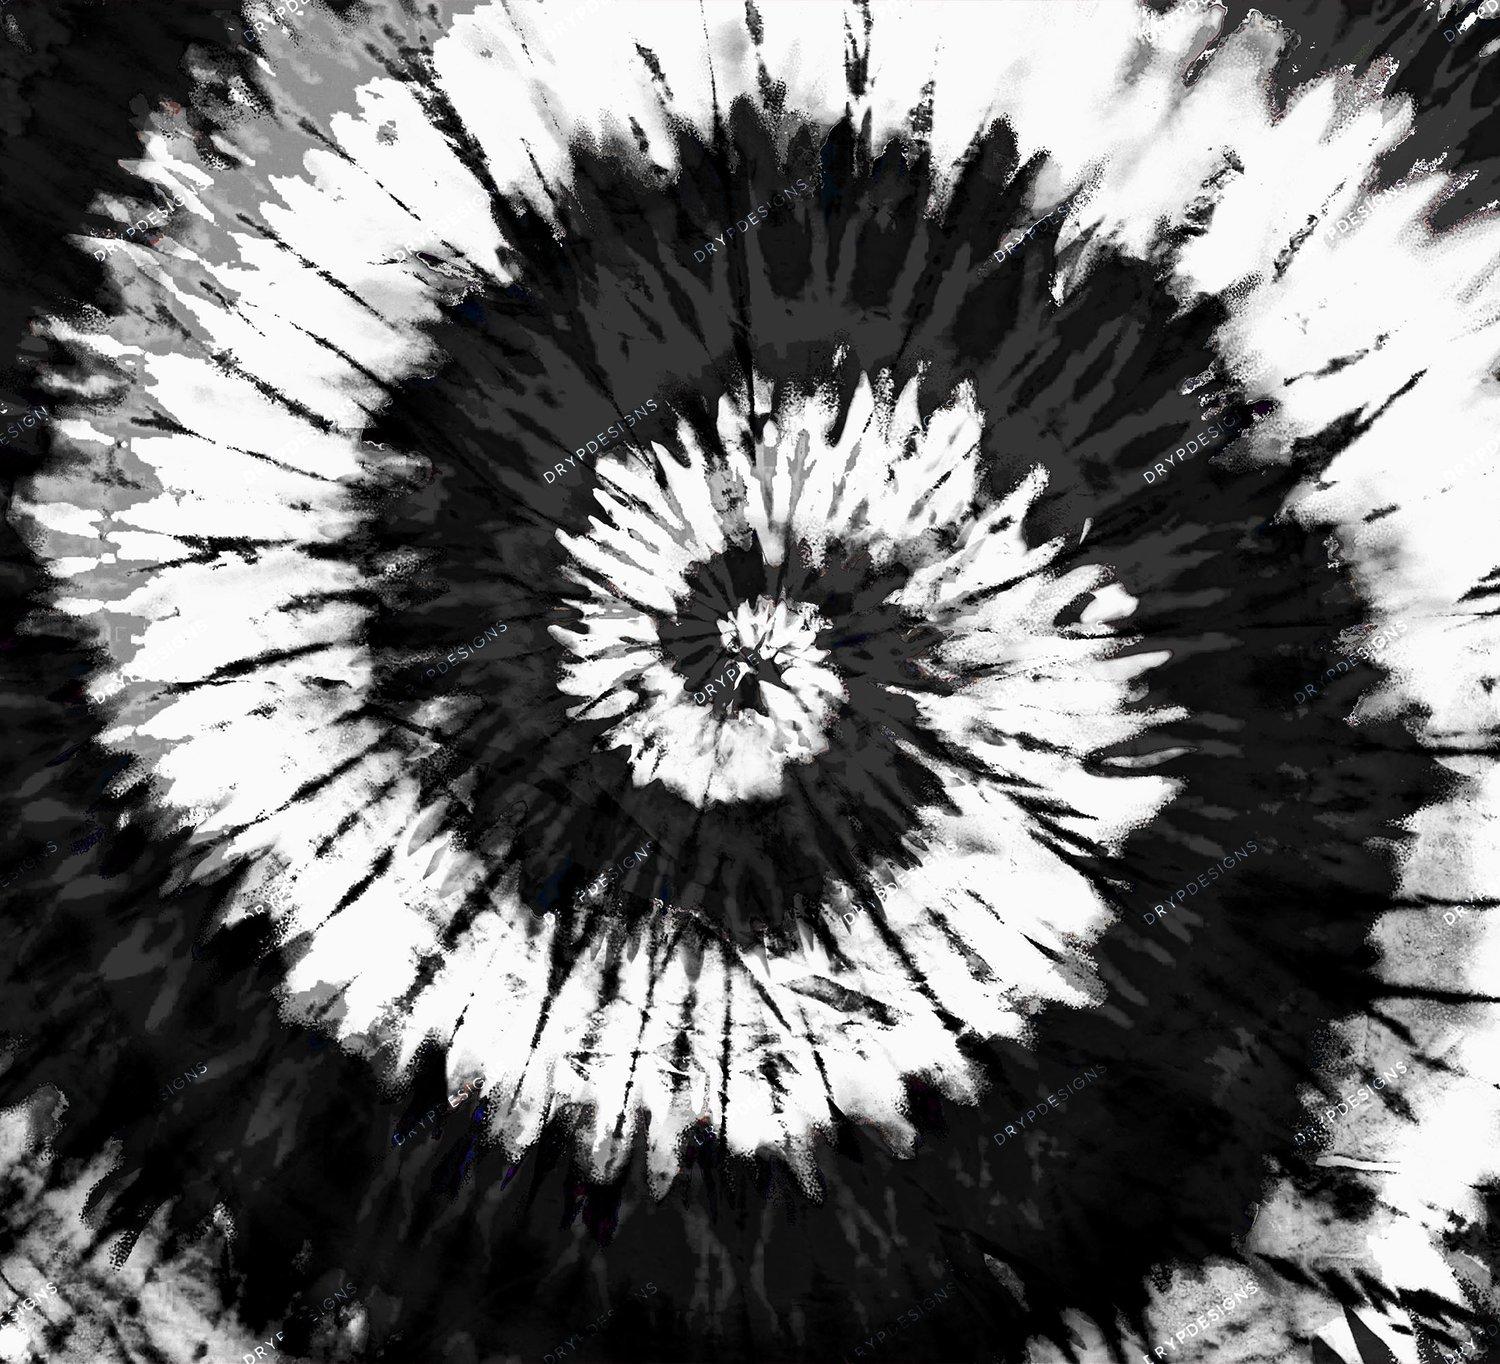 Black and White Tie Dye Wallpapers - Top Free Black and White Tie Dye ...